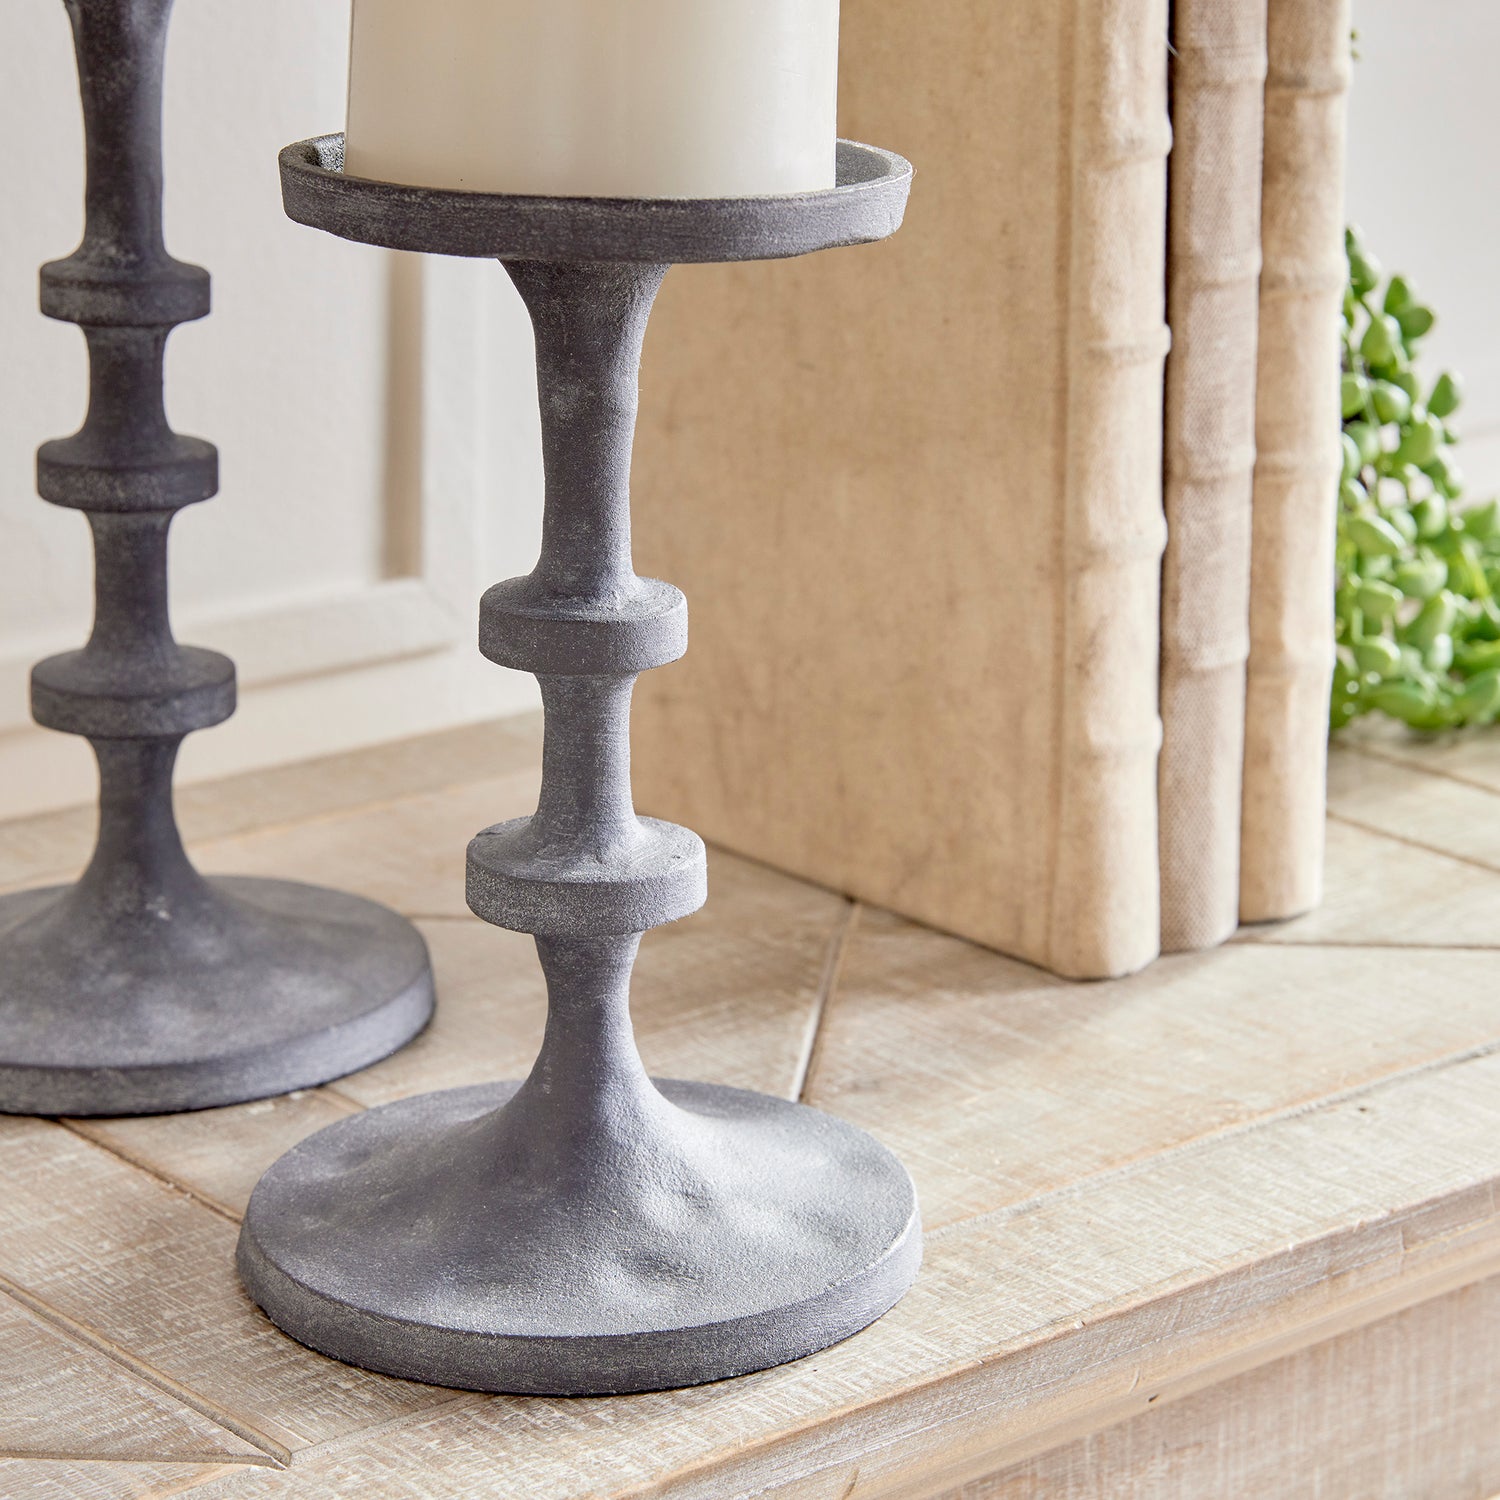 Abacus Petite Candle Stands, Set Of 2